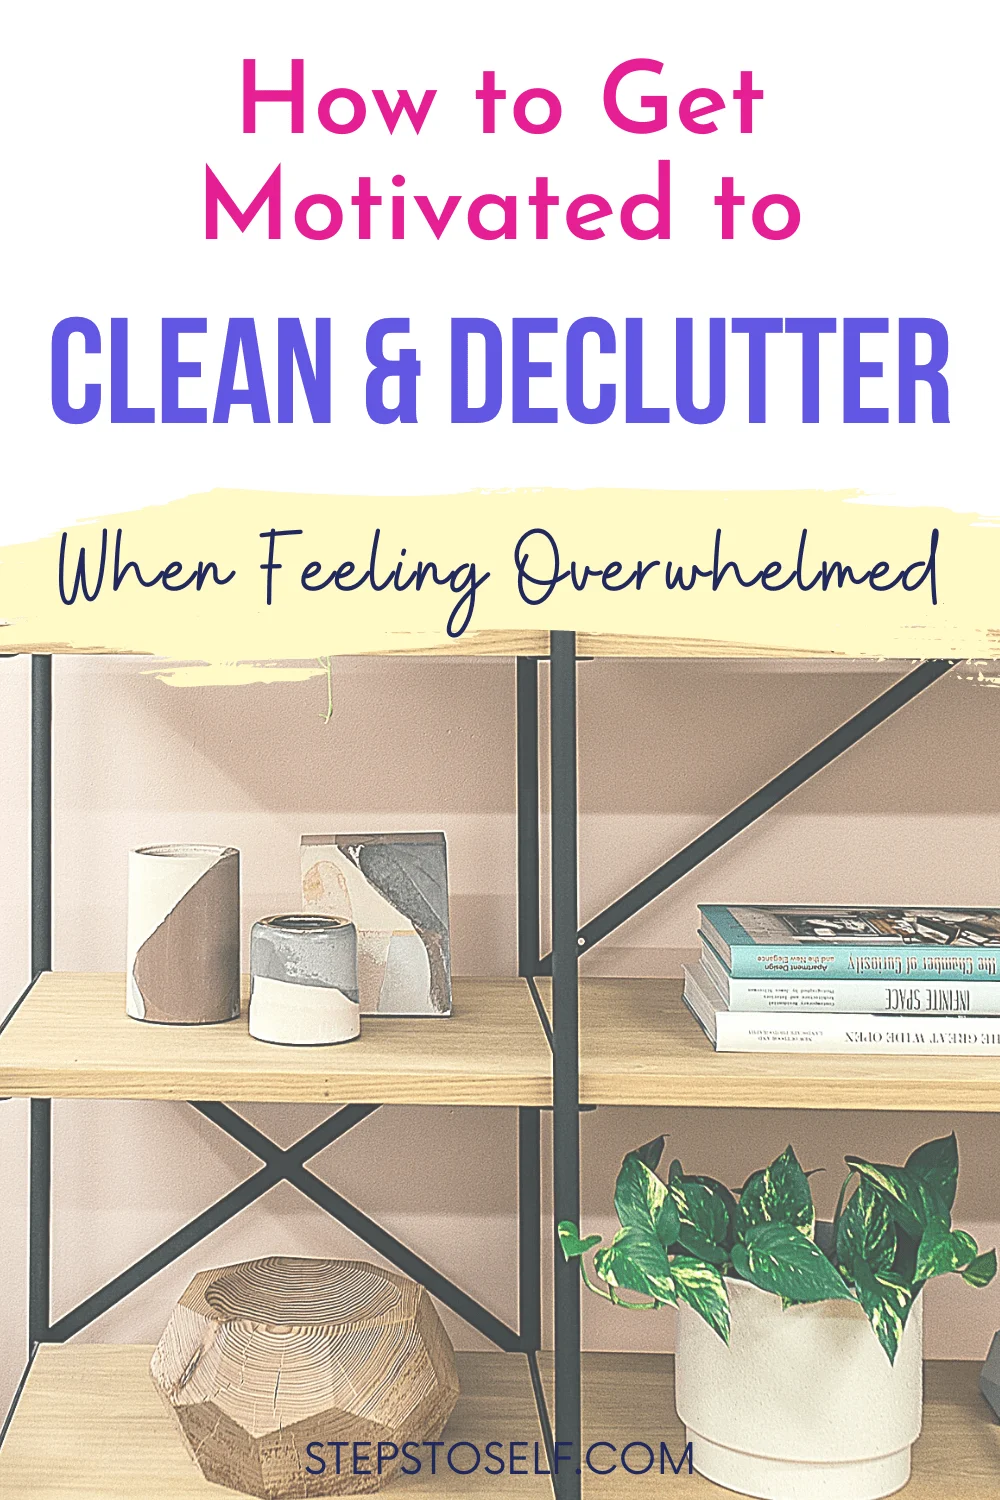 How to get motivated to clean & declutter when feeling overwhelmed